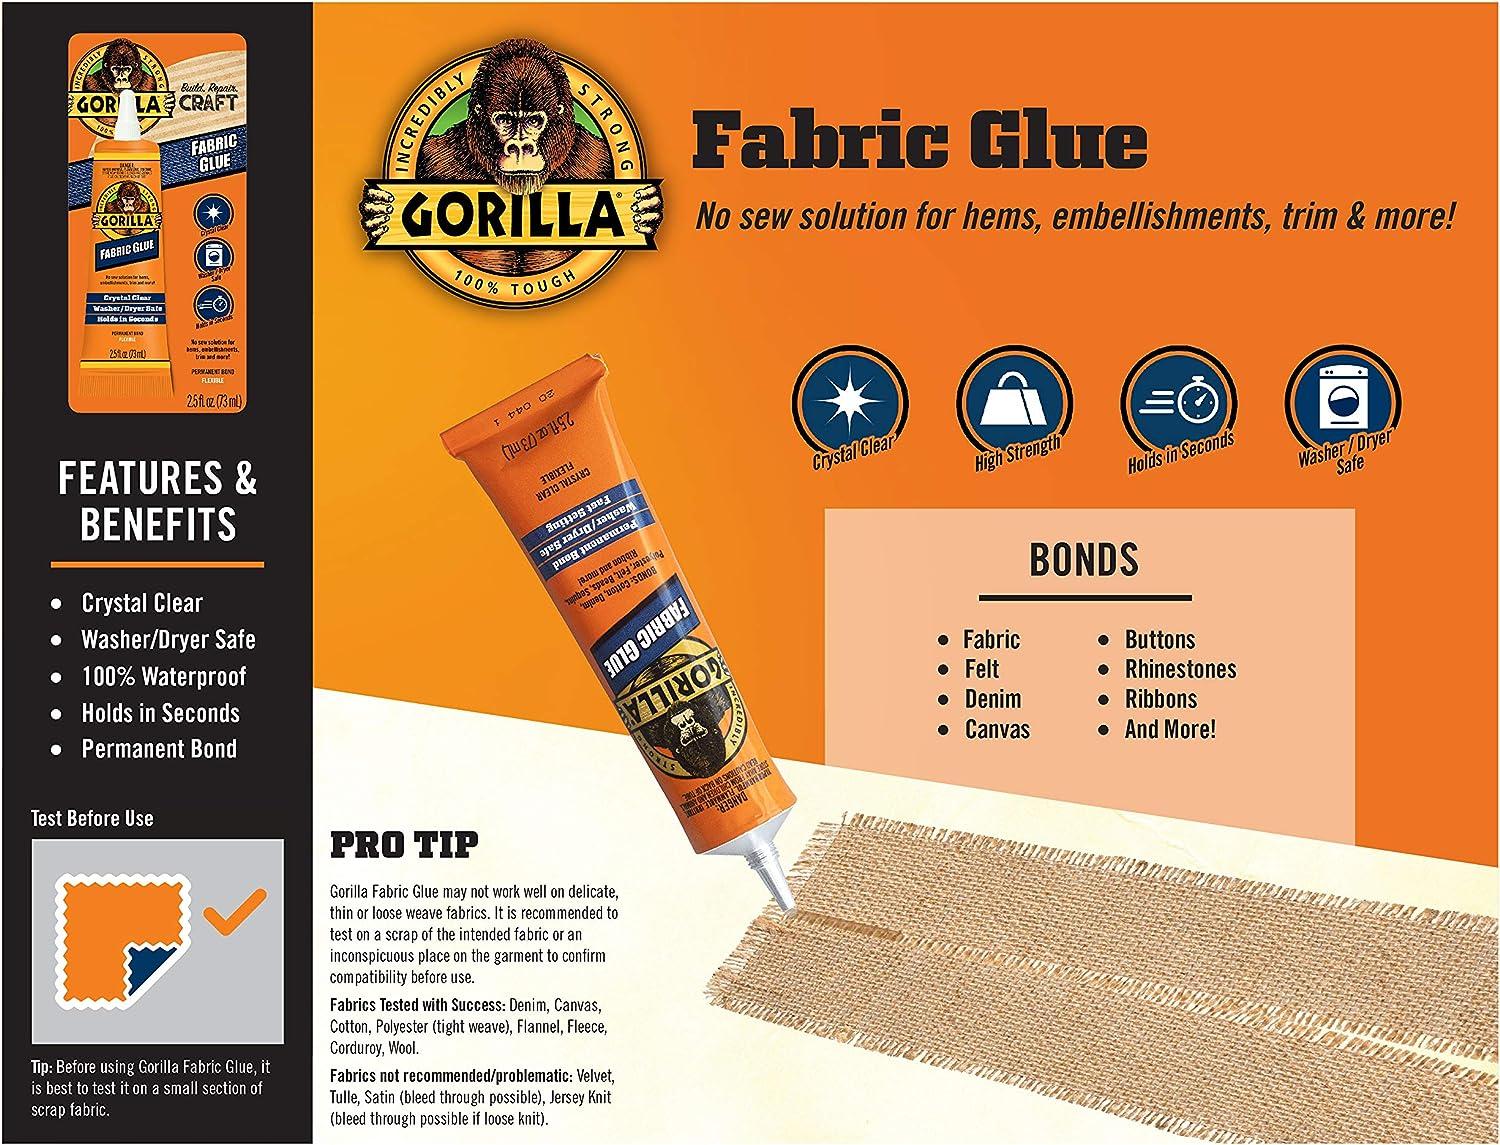 Gorilla Clear Grip Contact Adhesive, Waterproof, 3 Ounce, Clear, (Pack of 1)